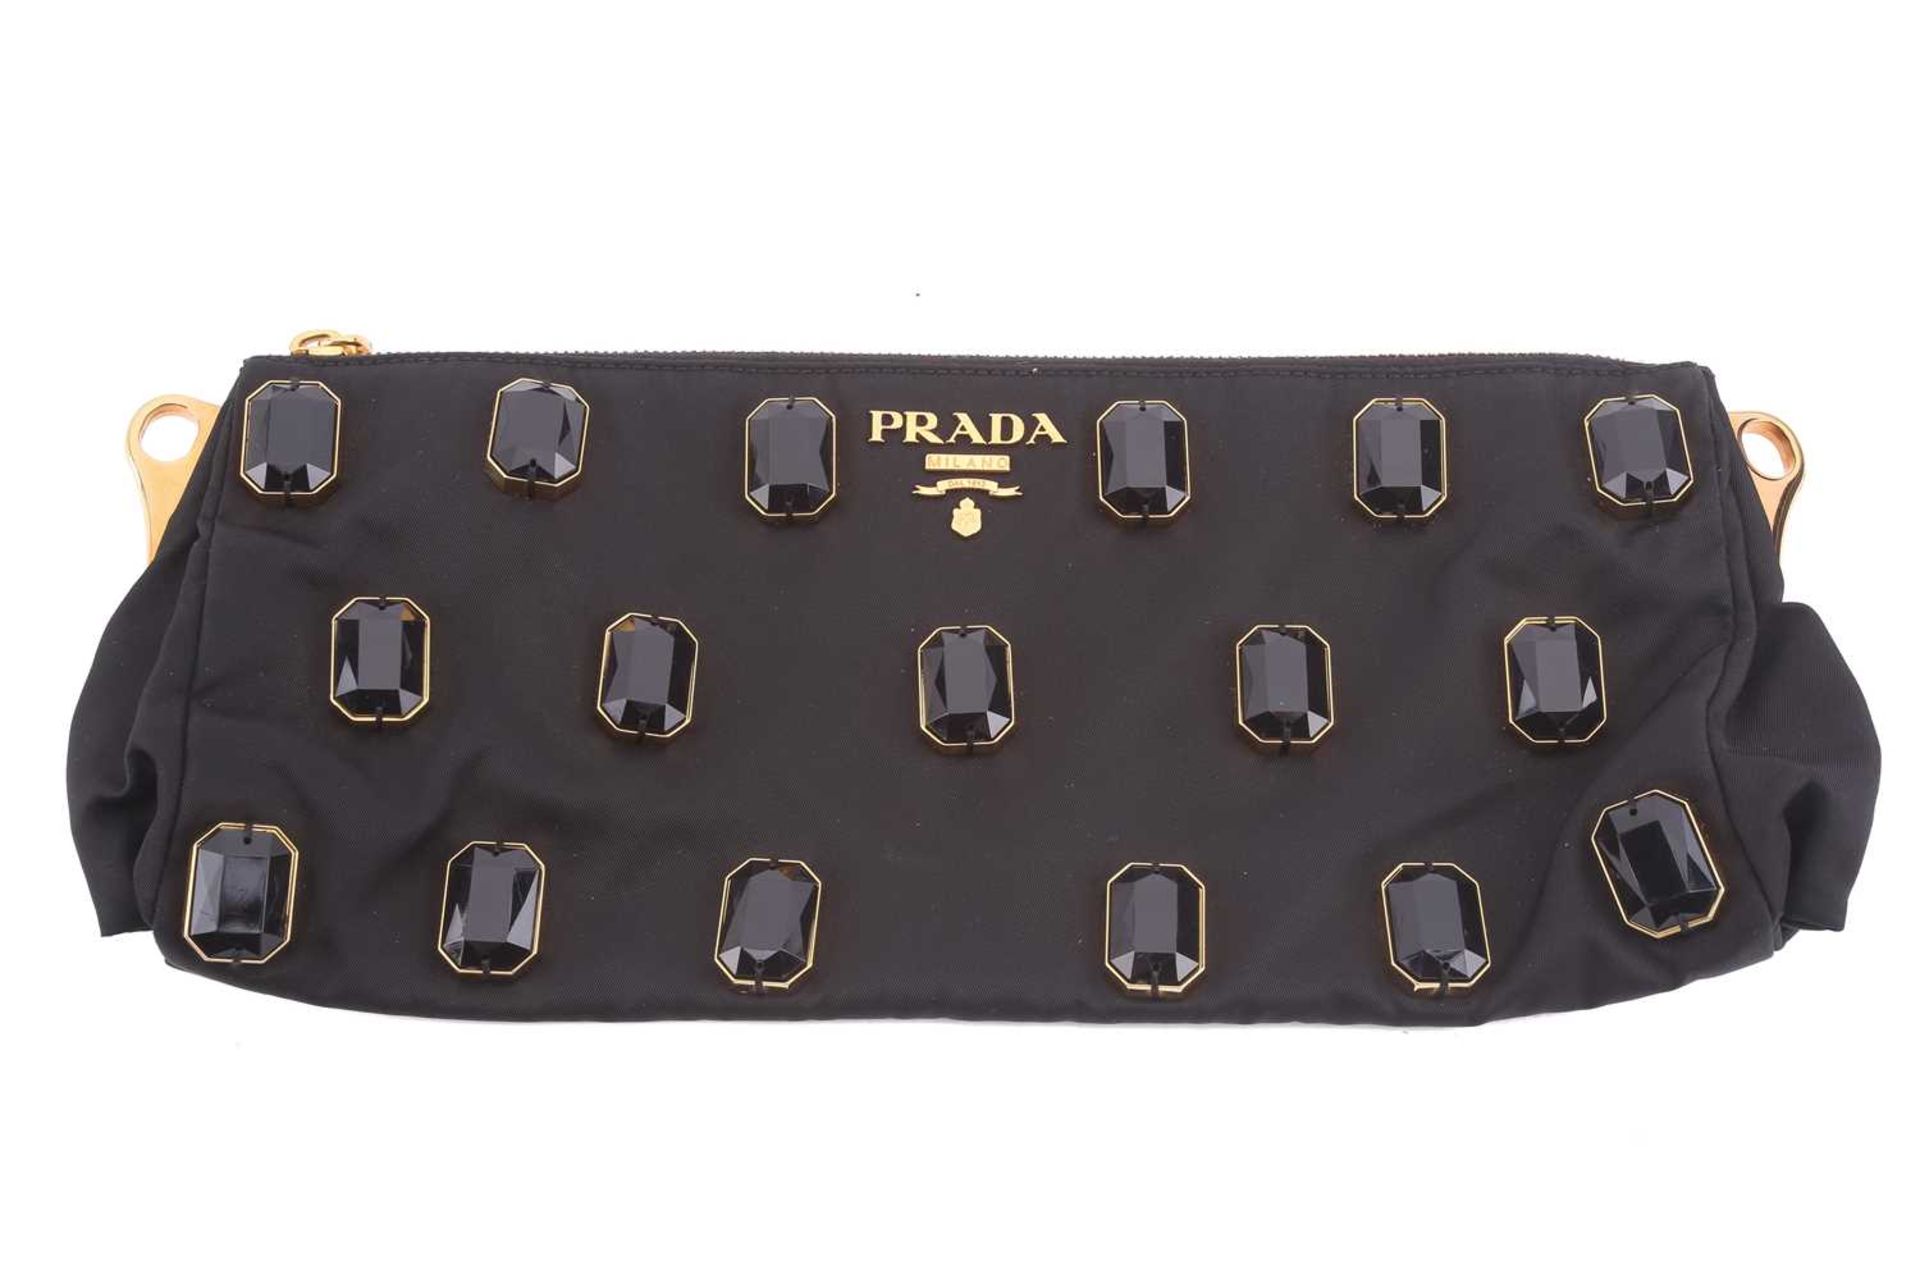 Prada - a bejewelled 'Whips Pietre' clutch in black nylon, from 2009 Resort Collection, with